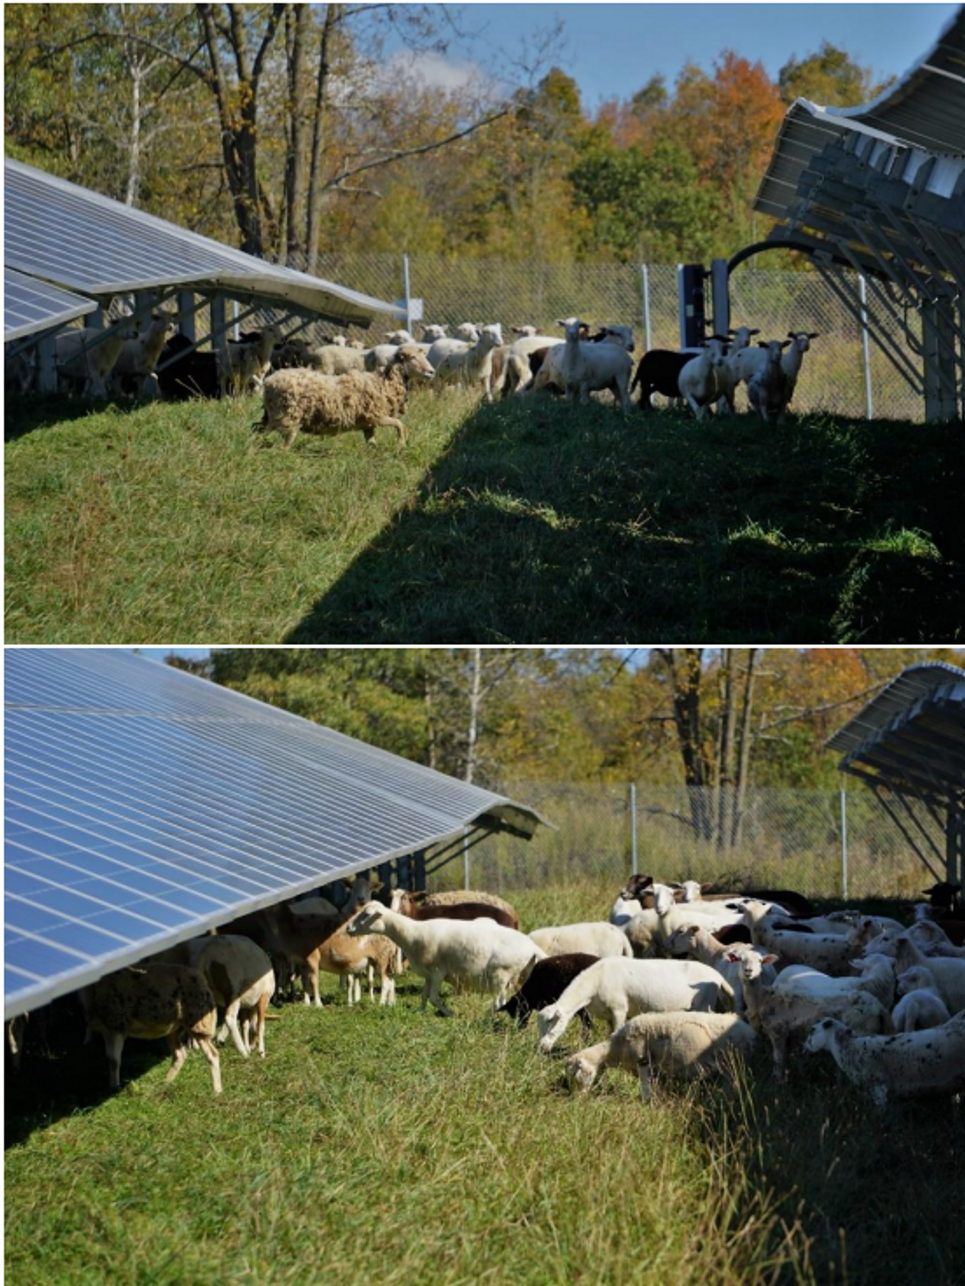 Sheep grazing under a ground mounted solar panel array in a field - Onyx Renewabes